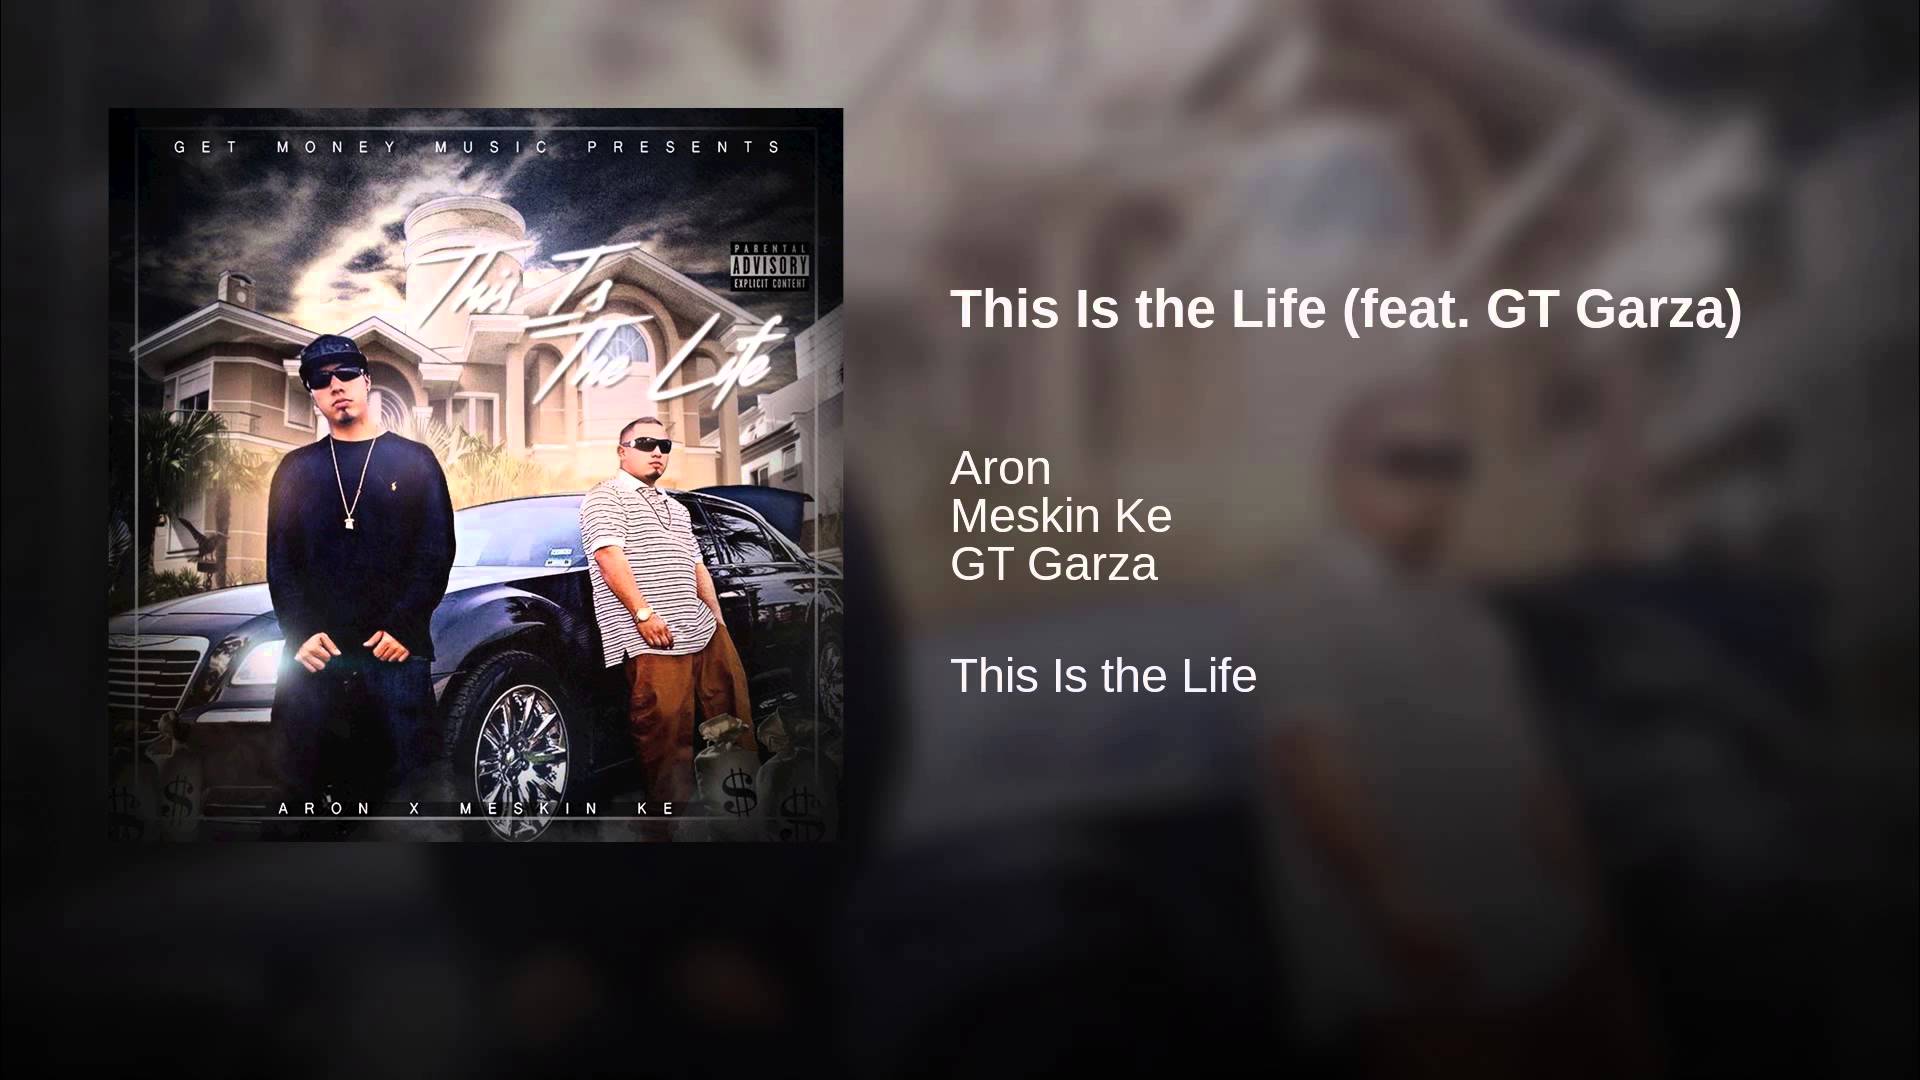 This Is the Life (feat. GT Garza)